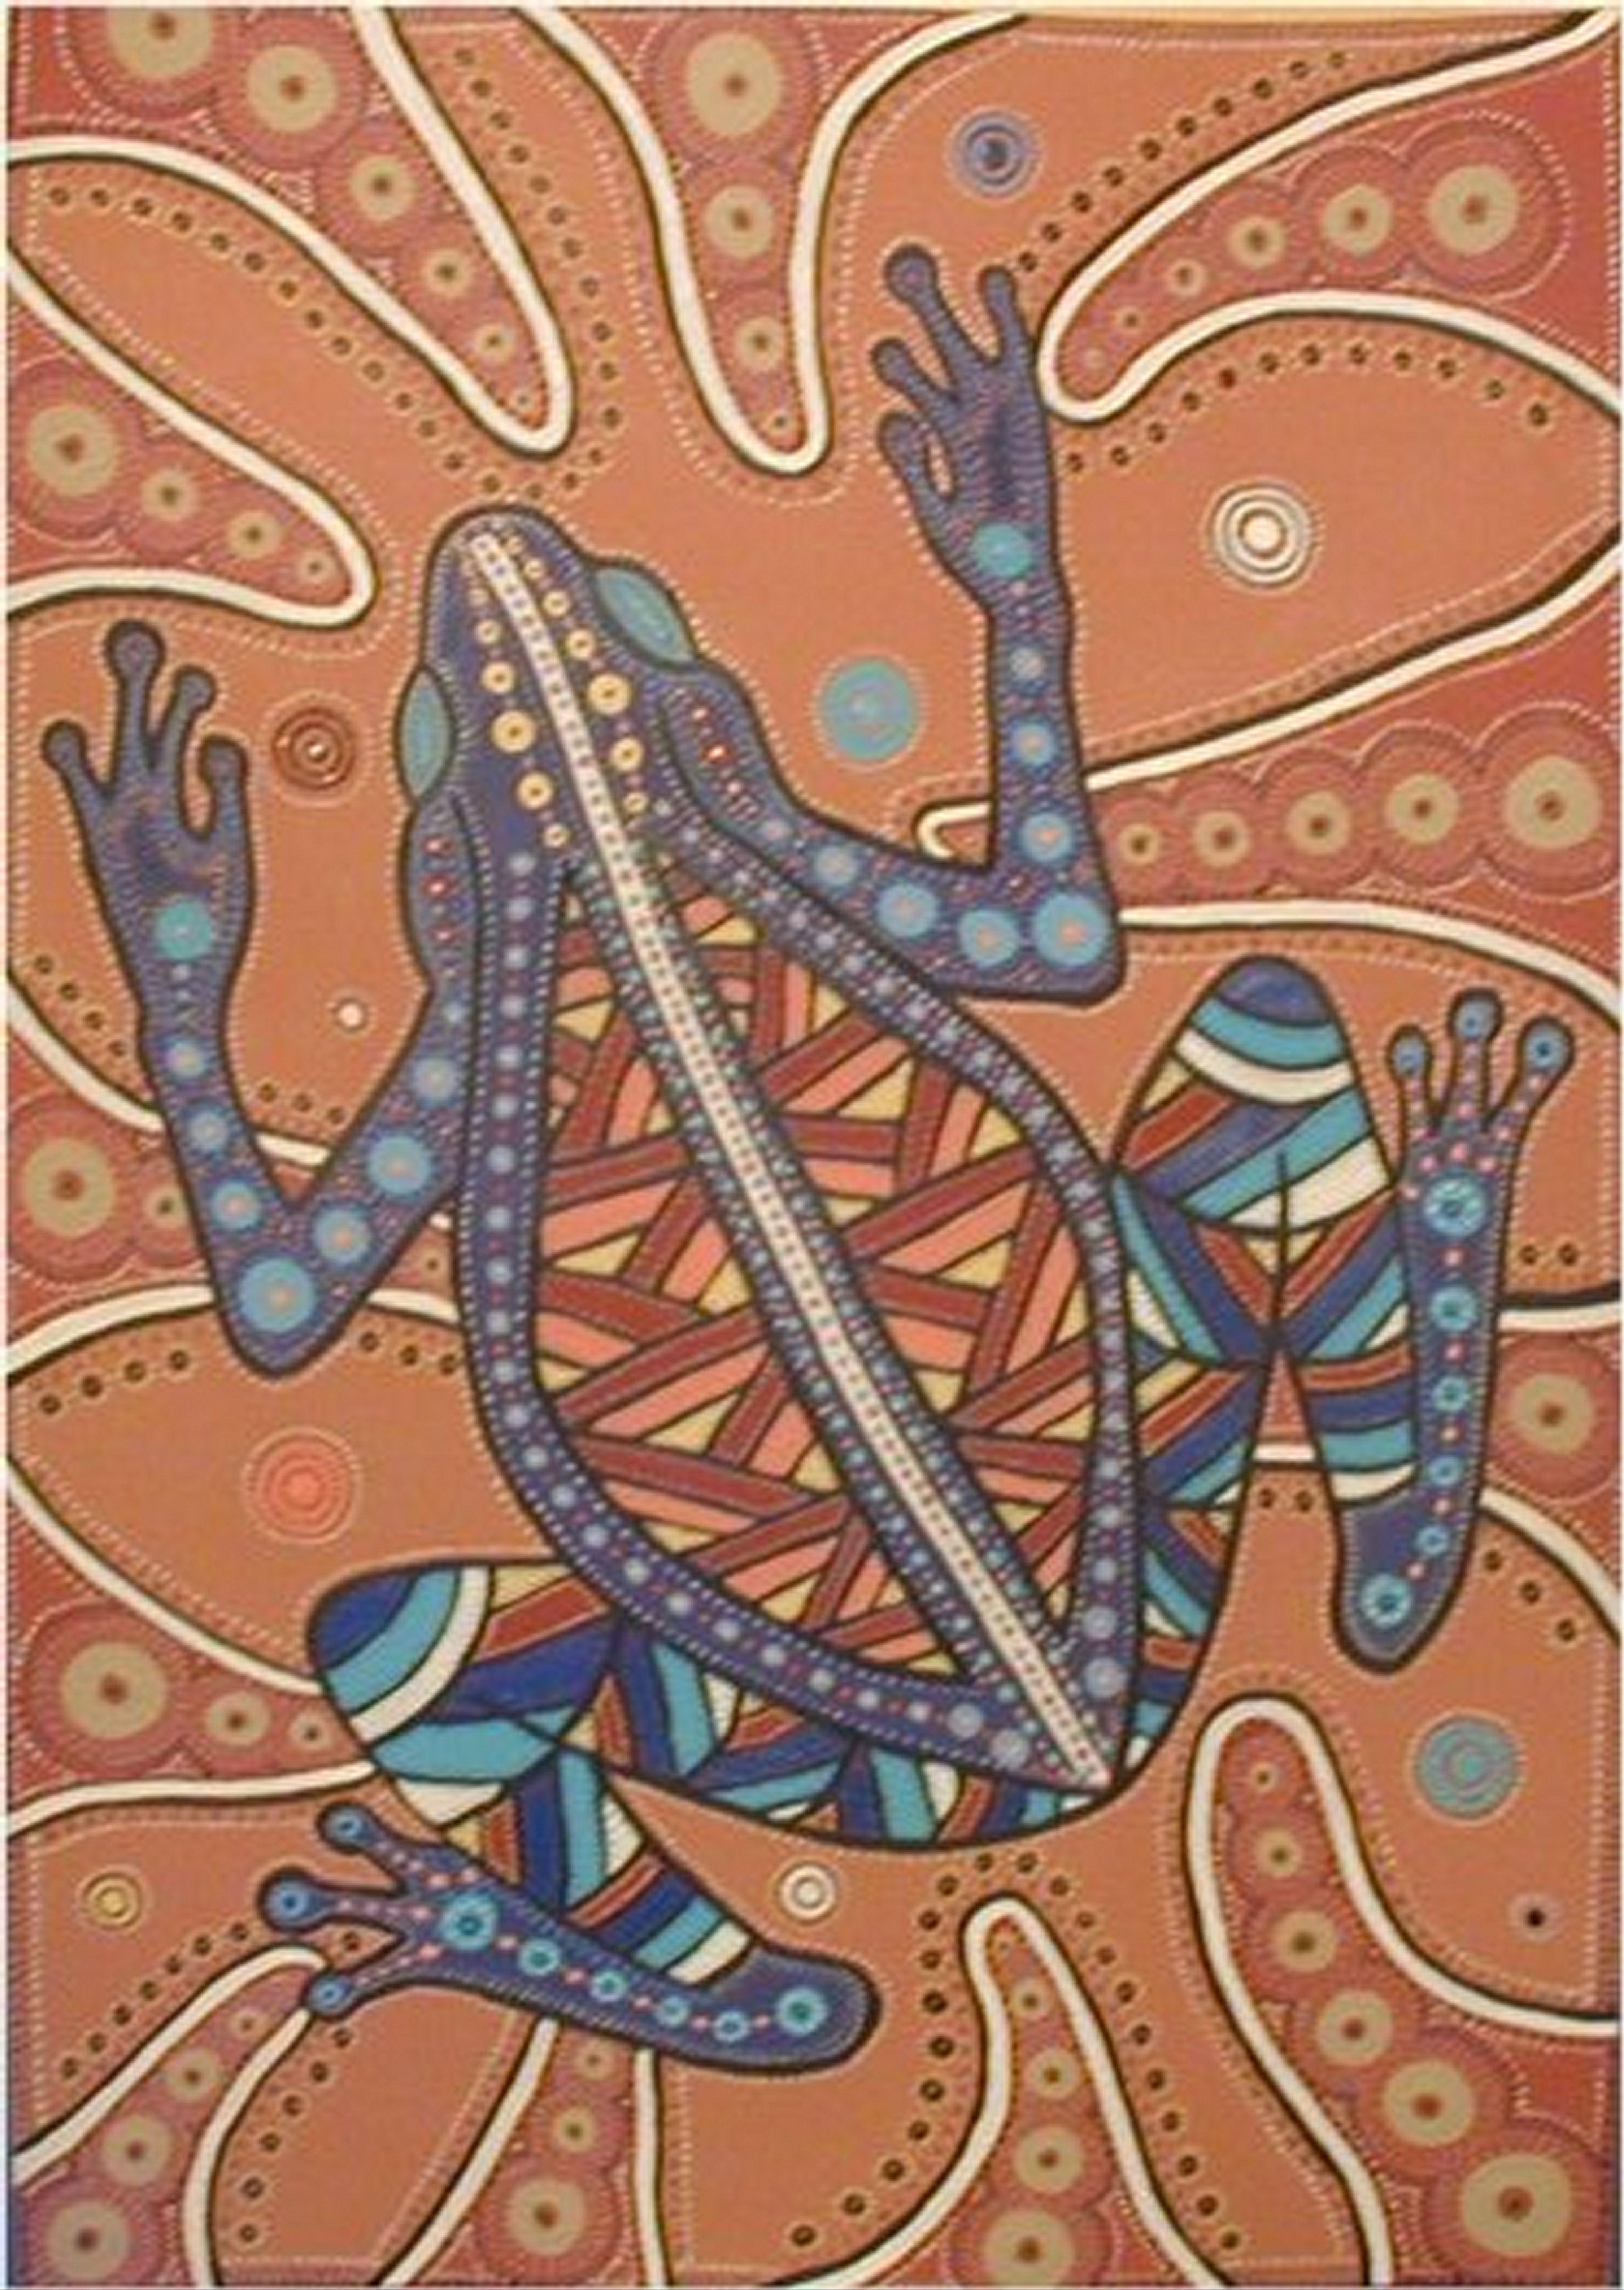 Aboriginal Art. Arts. for the ages